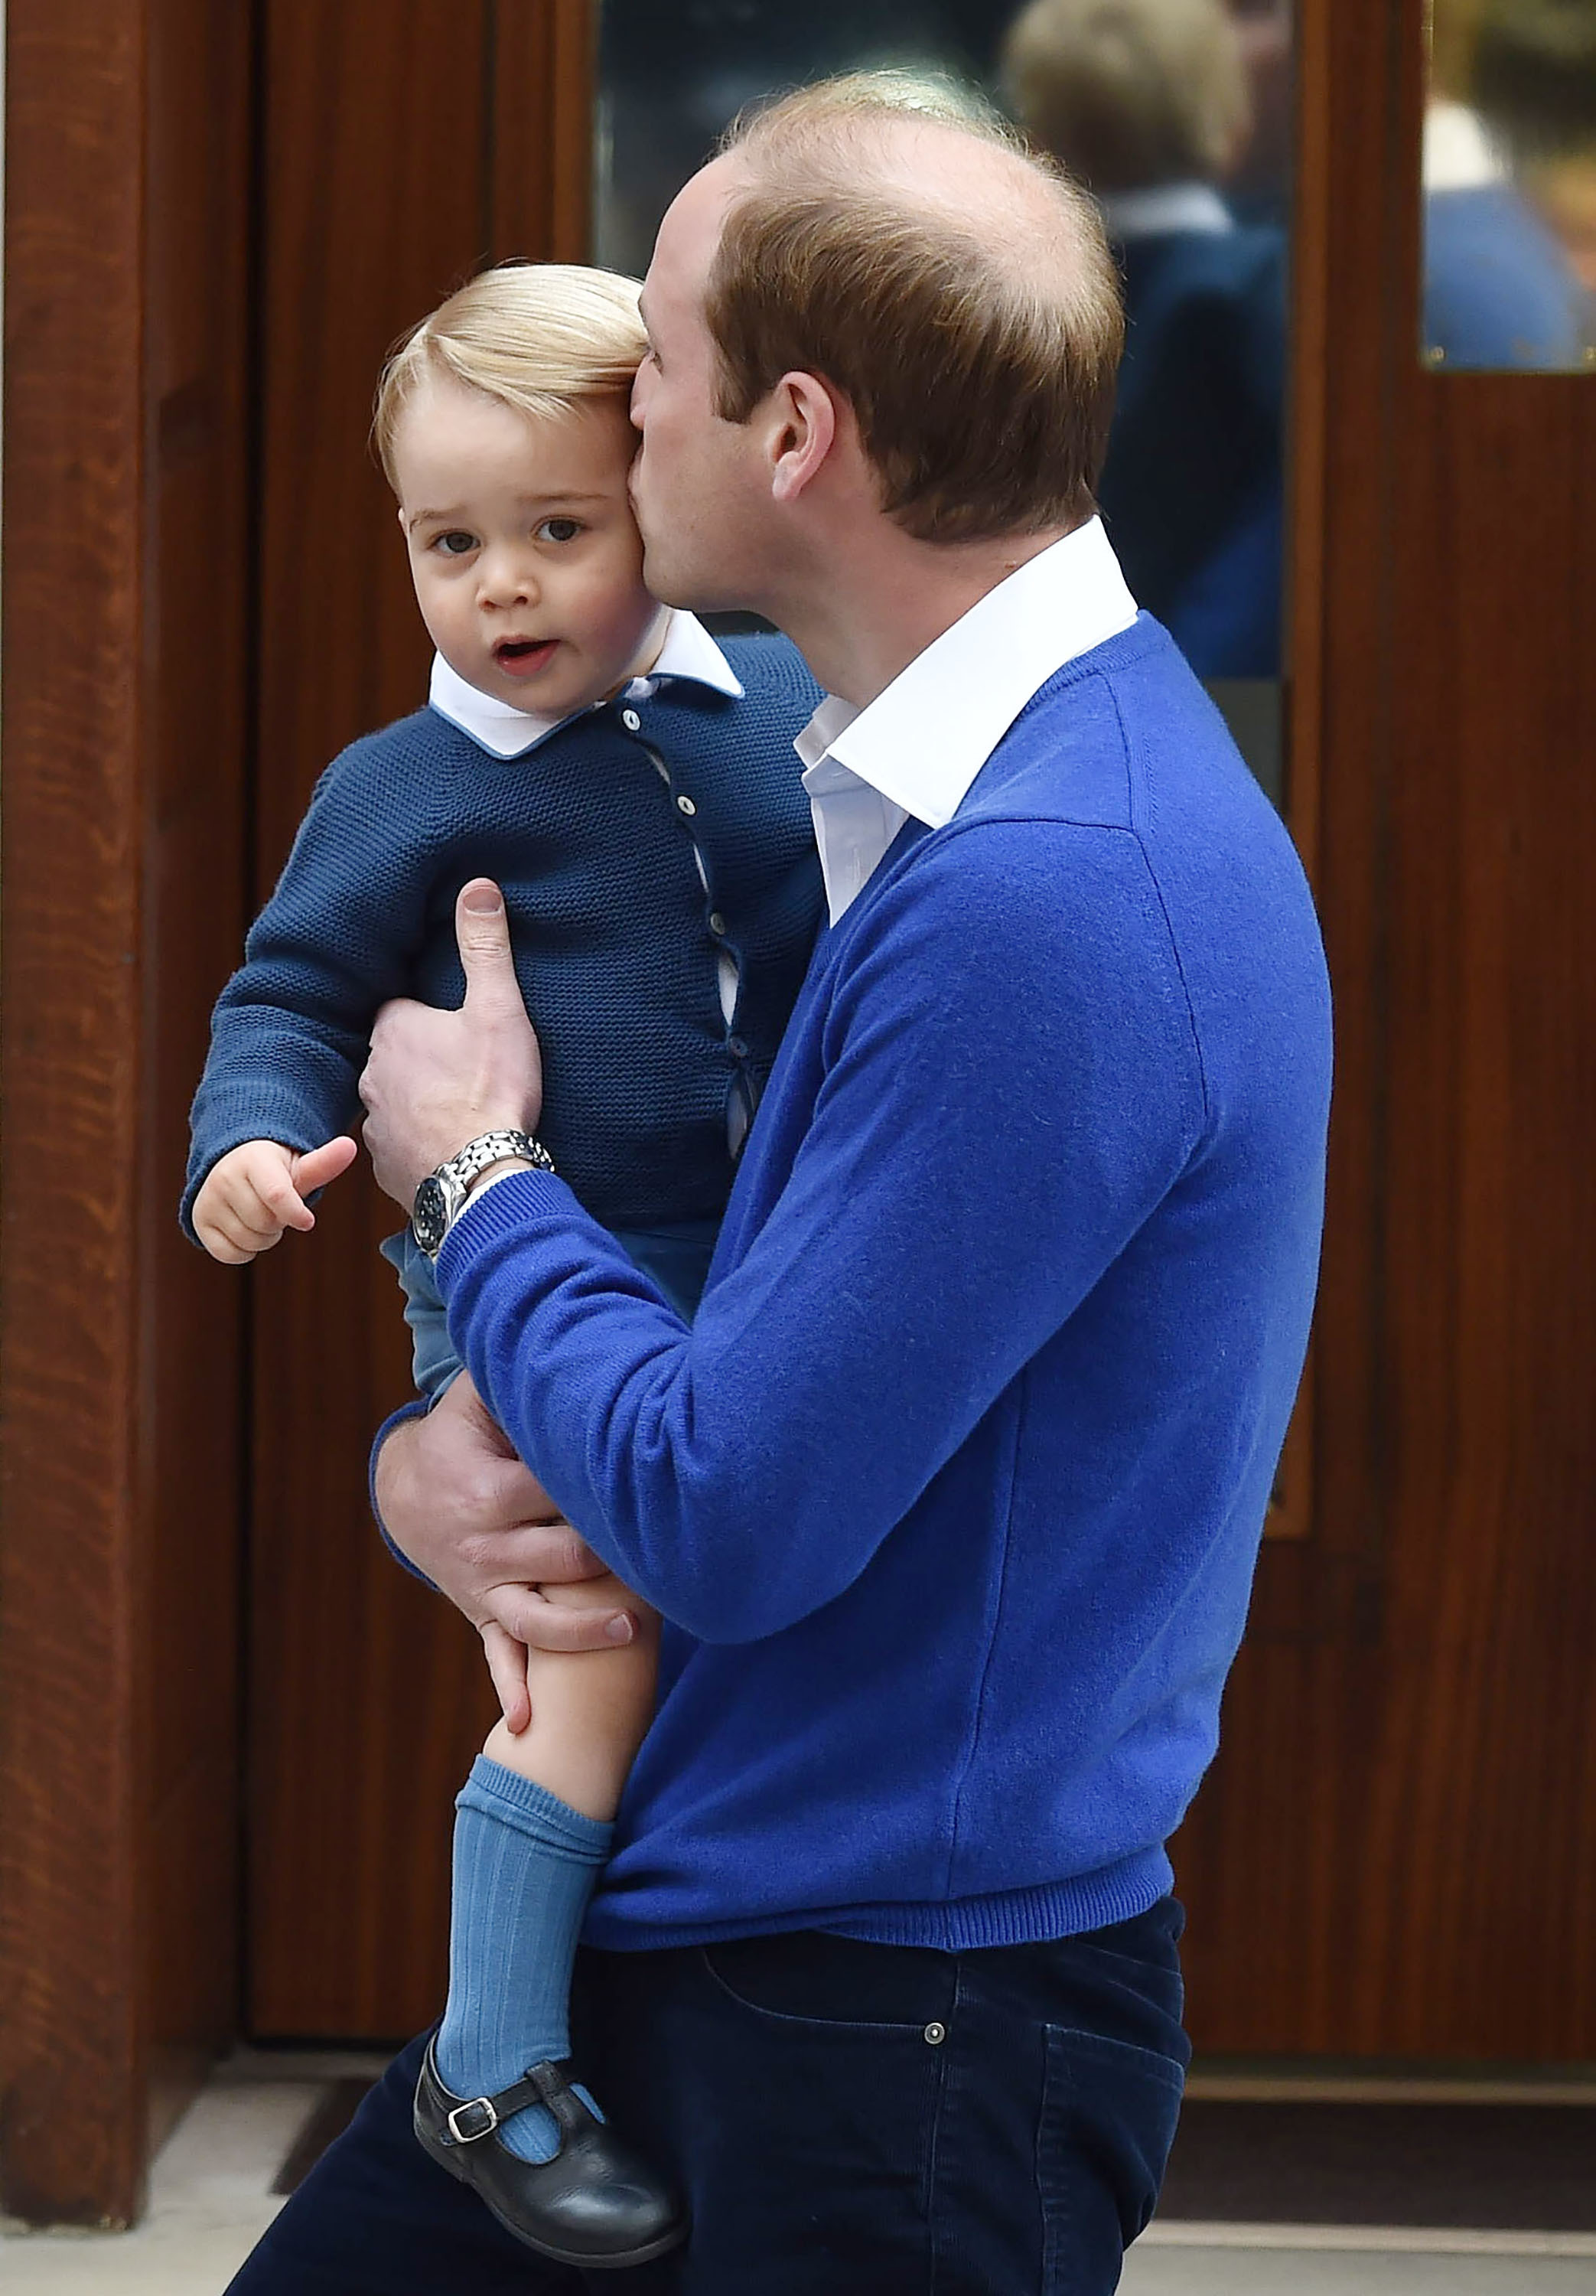 <p><a href="https://www.wonderwall.com/celebrity/profiles/overview/prince-william-482.article">Prince William</a> kissed Prince George outside the Lindo Wing at St. Mary's Hospital in London after the birth of Princess Charlotte on May 2, 2015.</p>